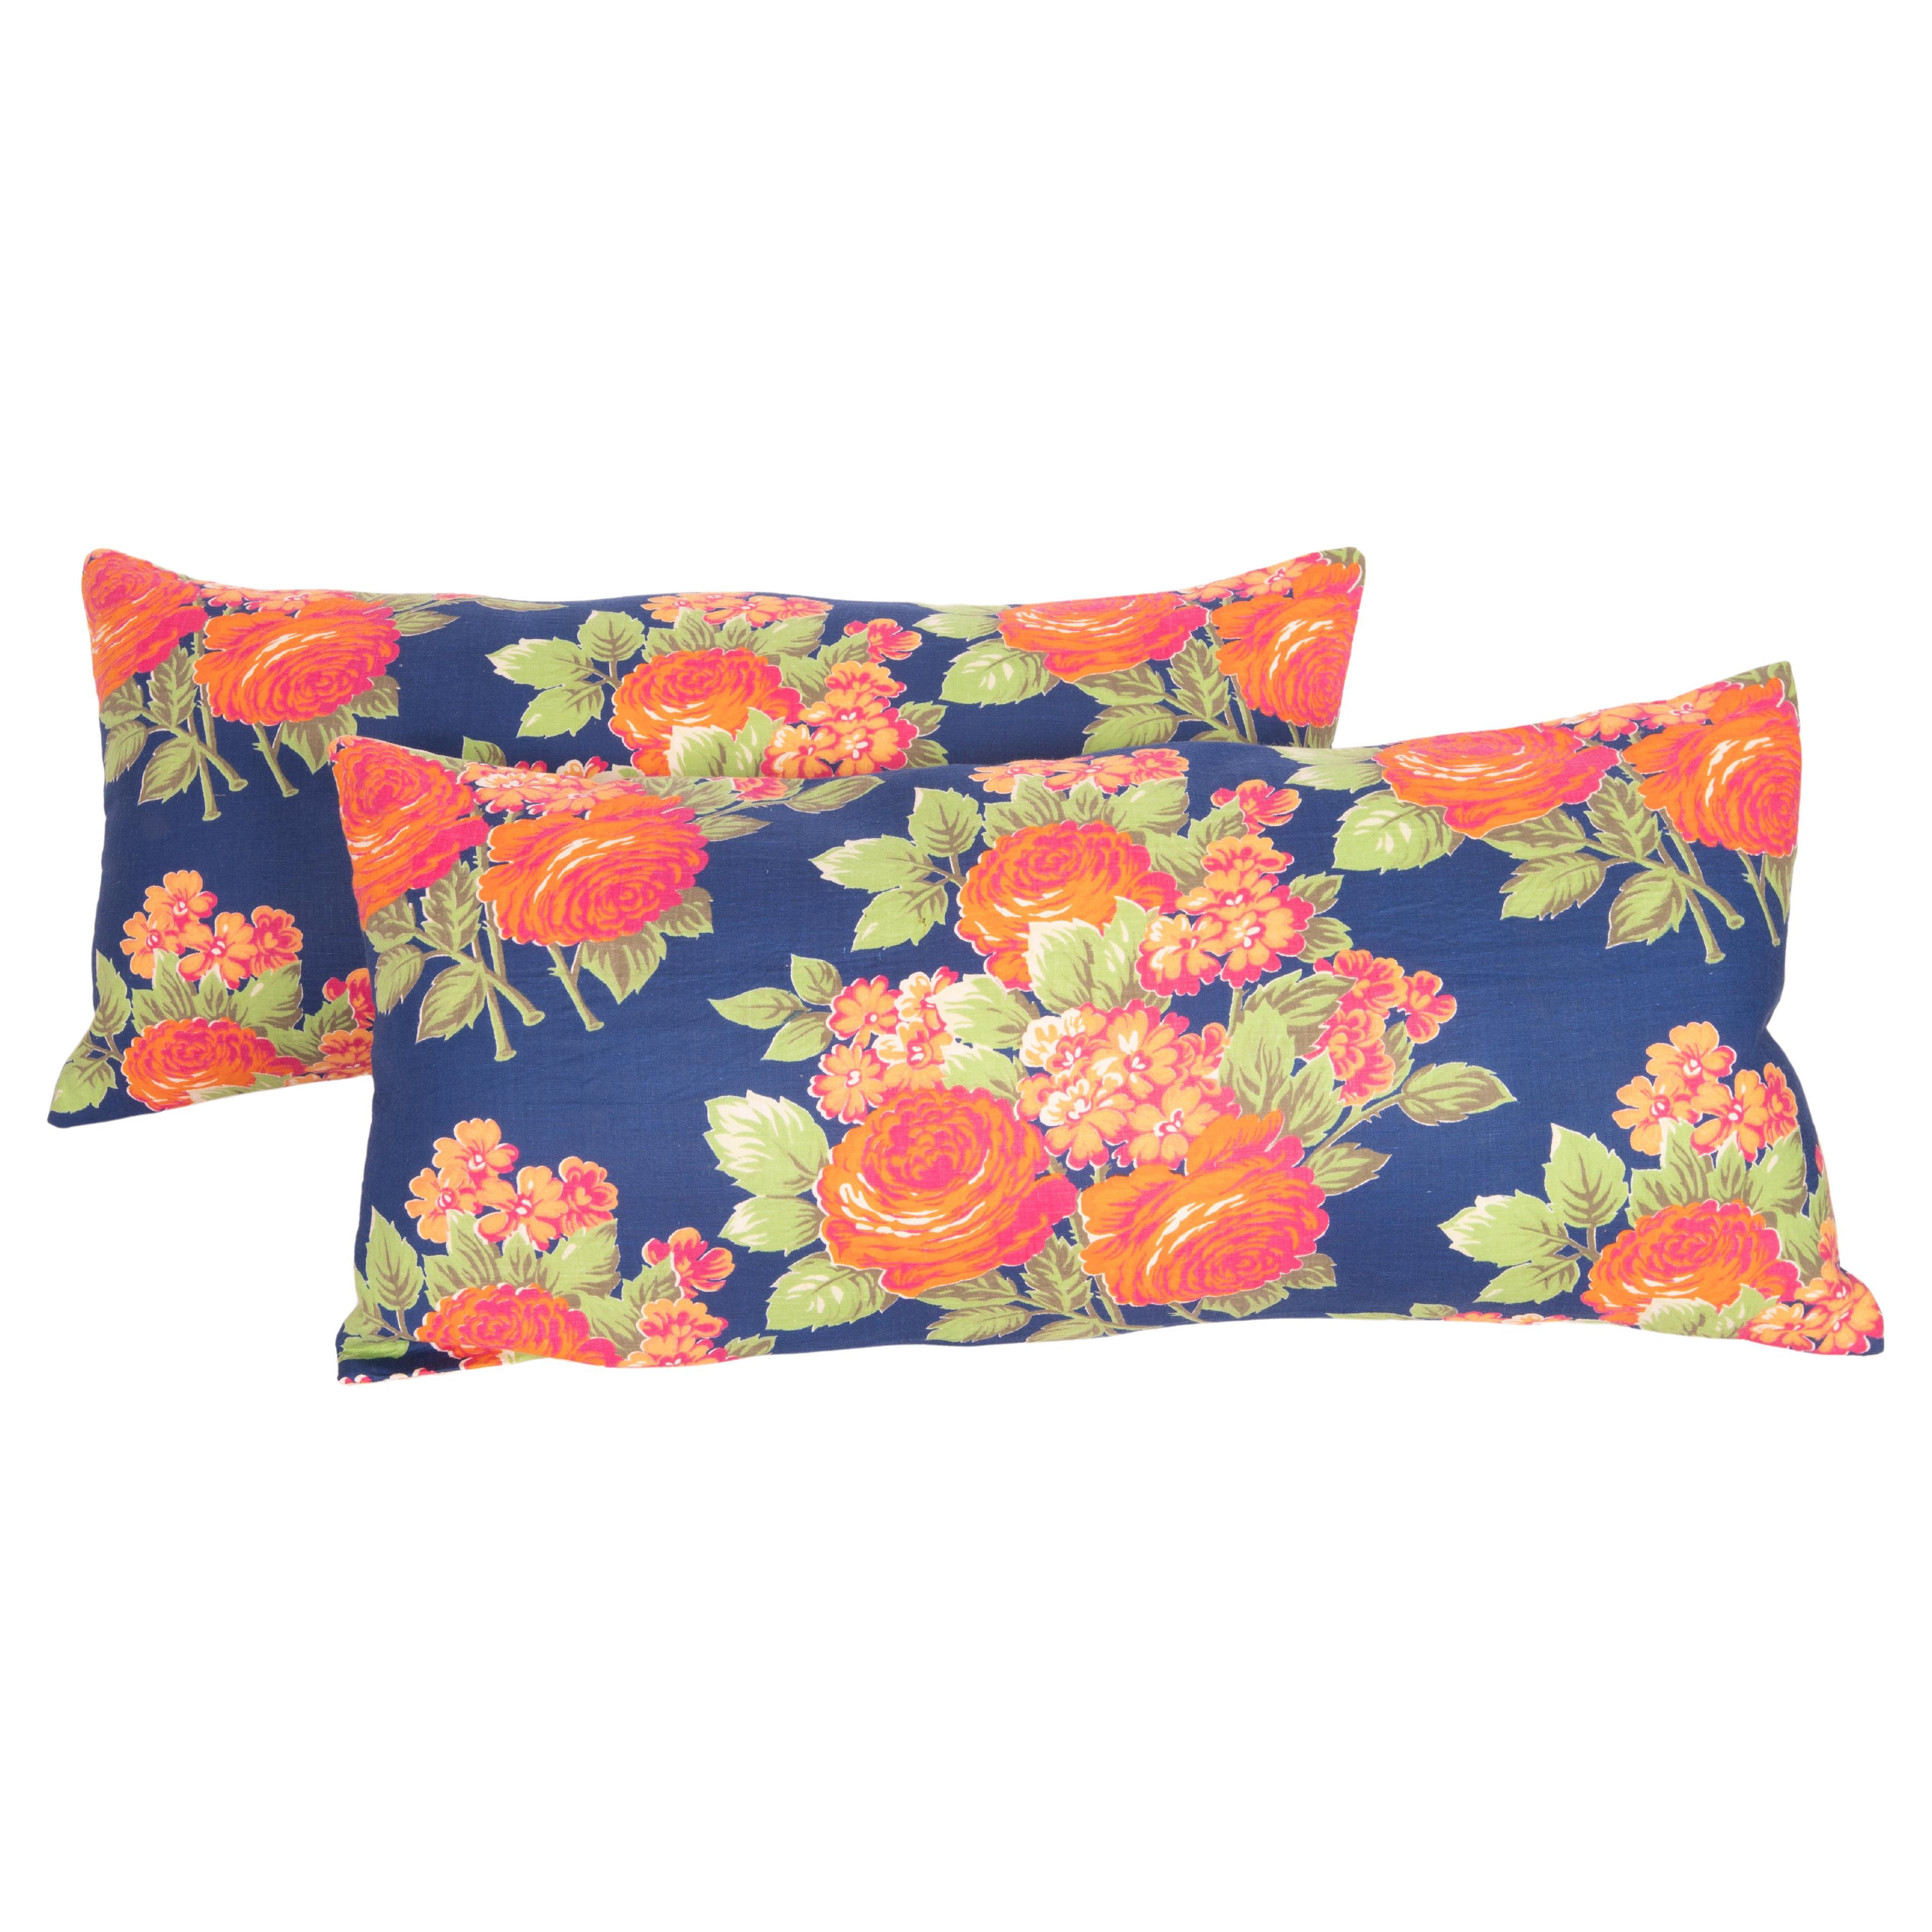 Russian Roller Printed Pillow Covers, Mid-20th C For Sale